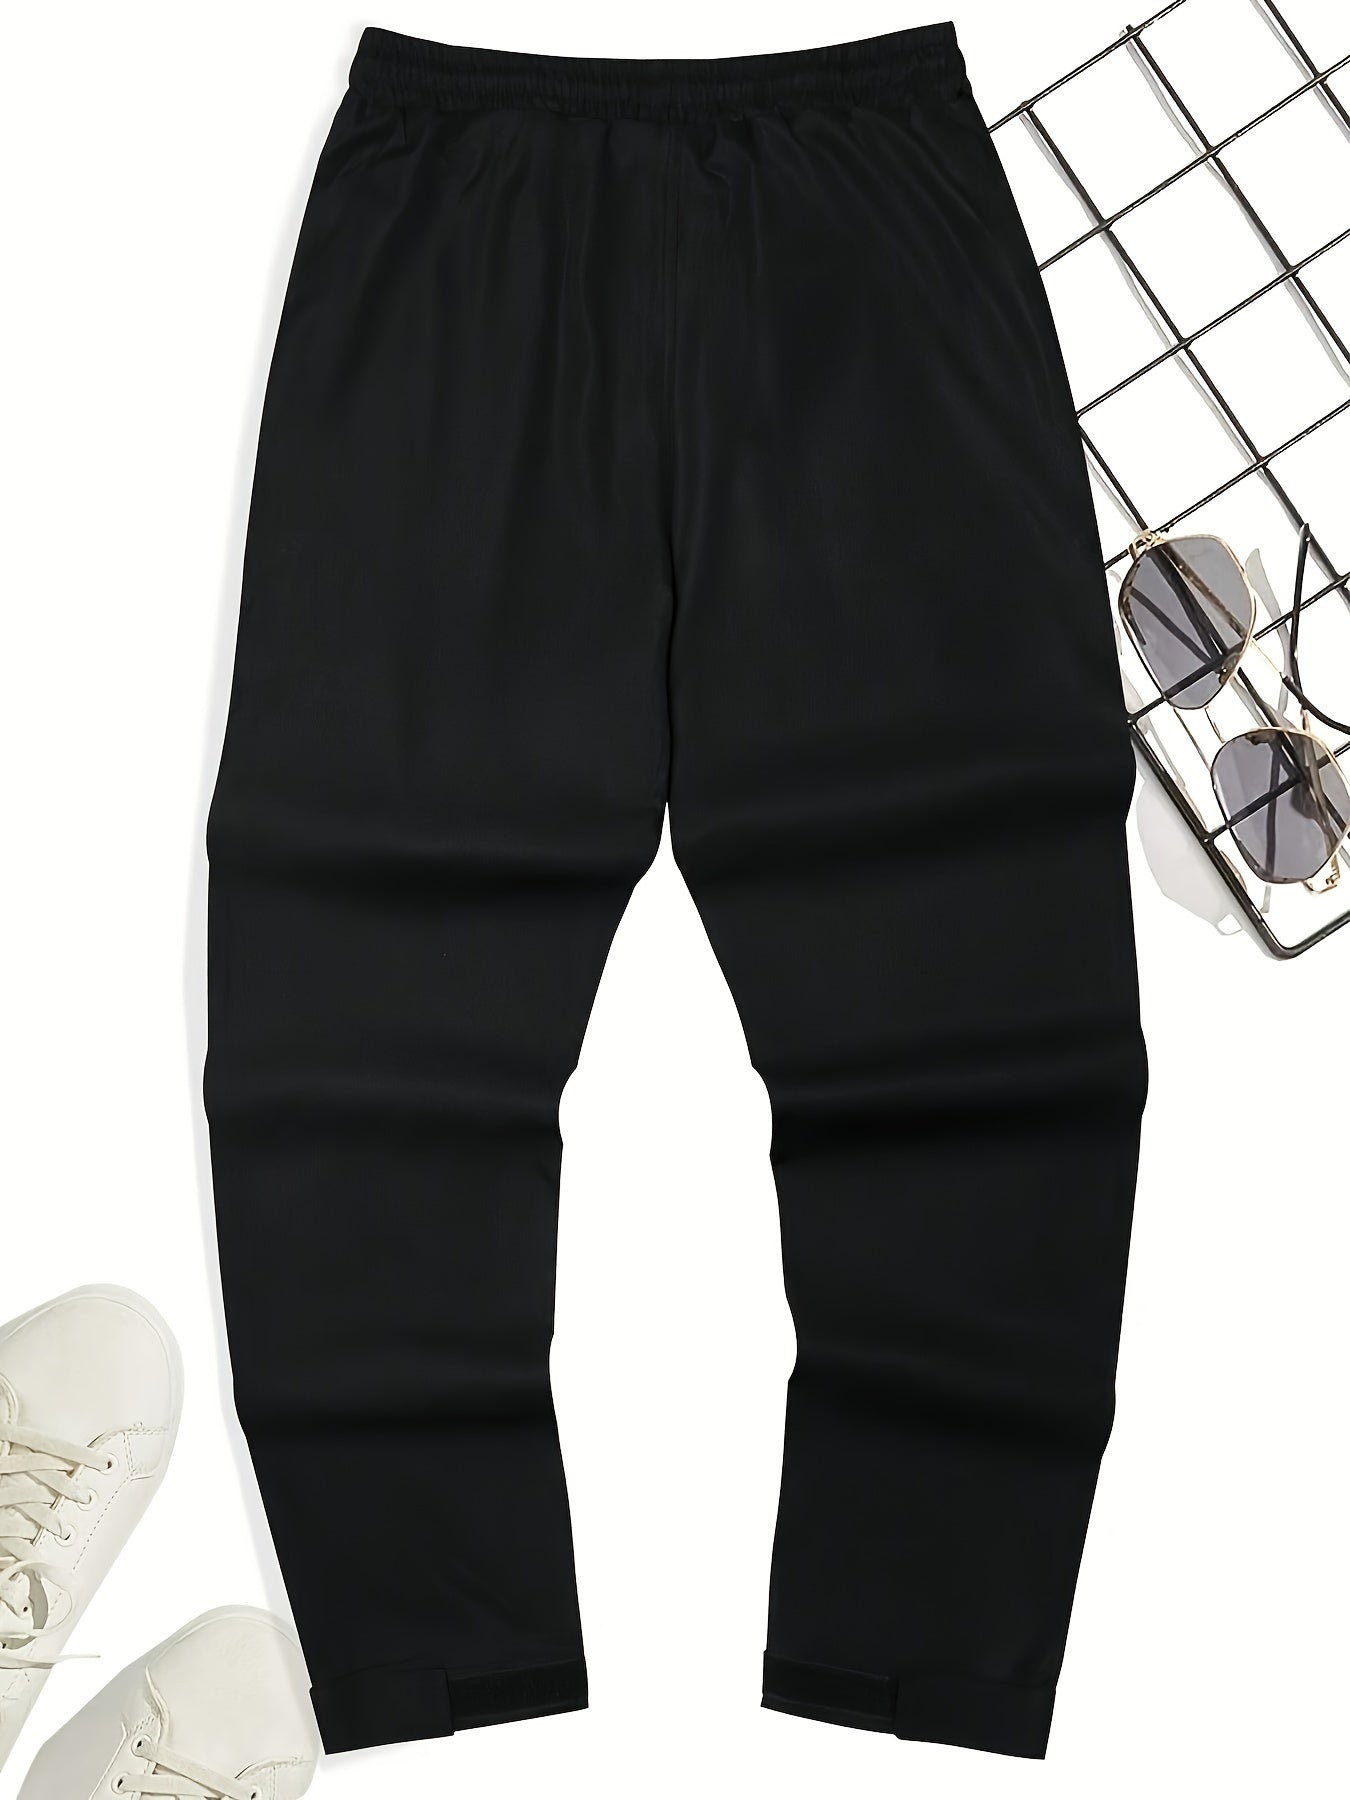 Men's Trendy Tapered Pants, Casual Stretch Waist Drawstring Joggers With Pockets